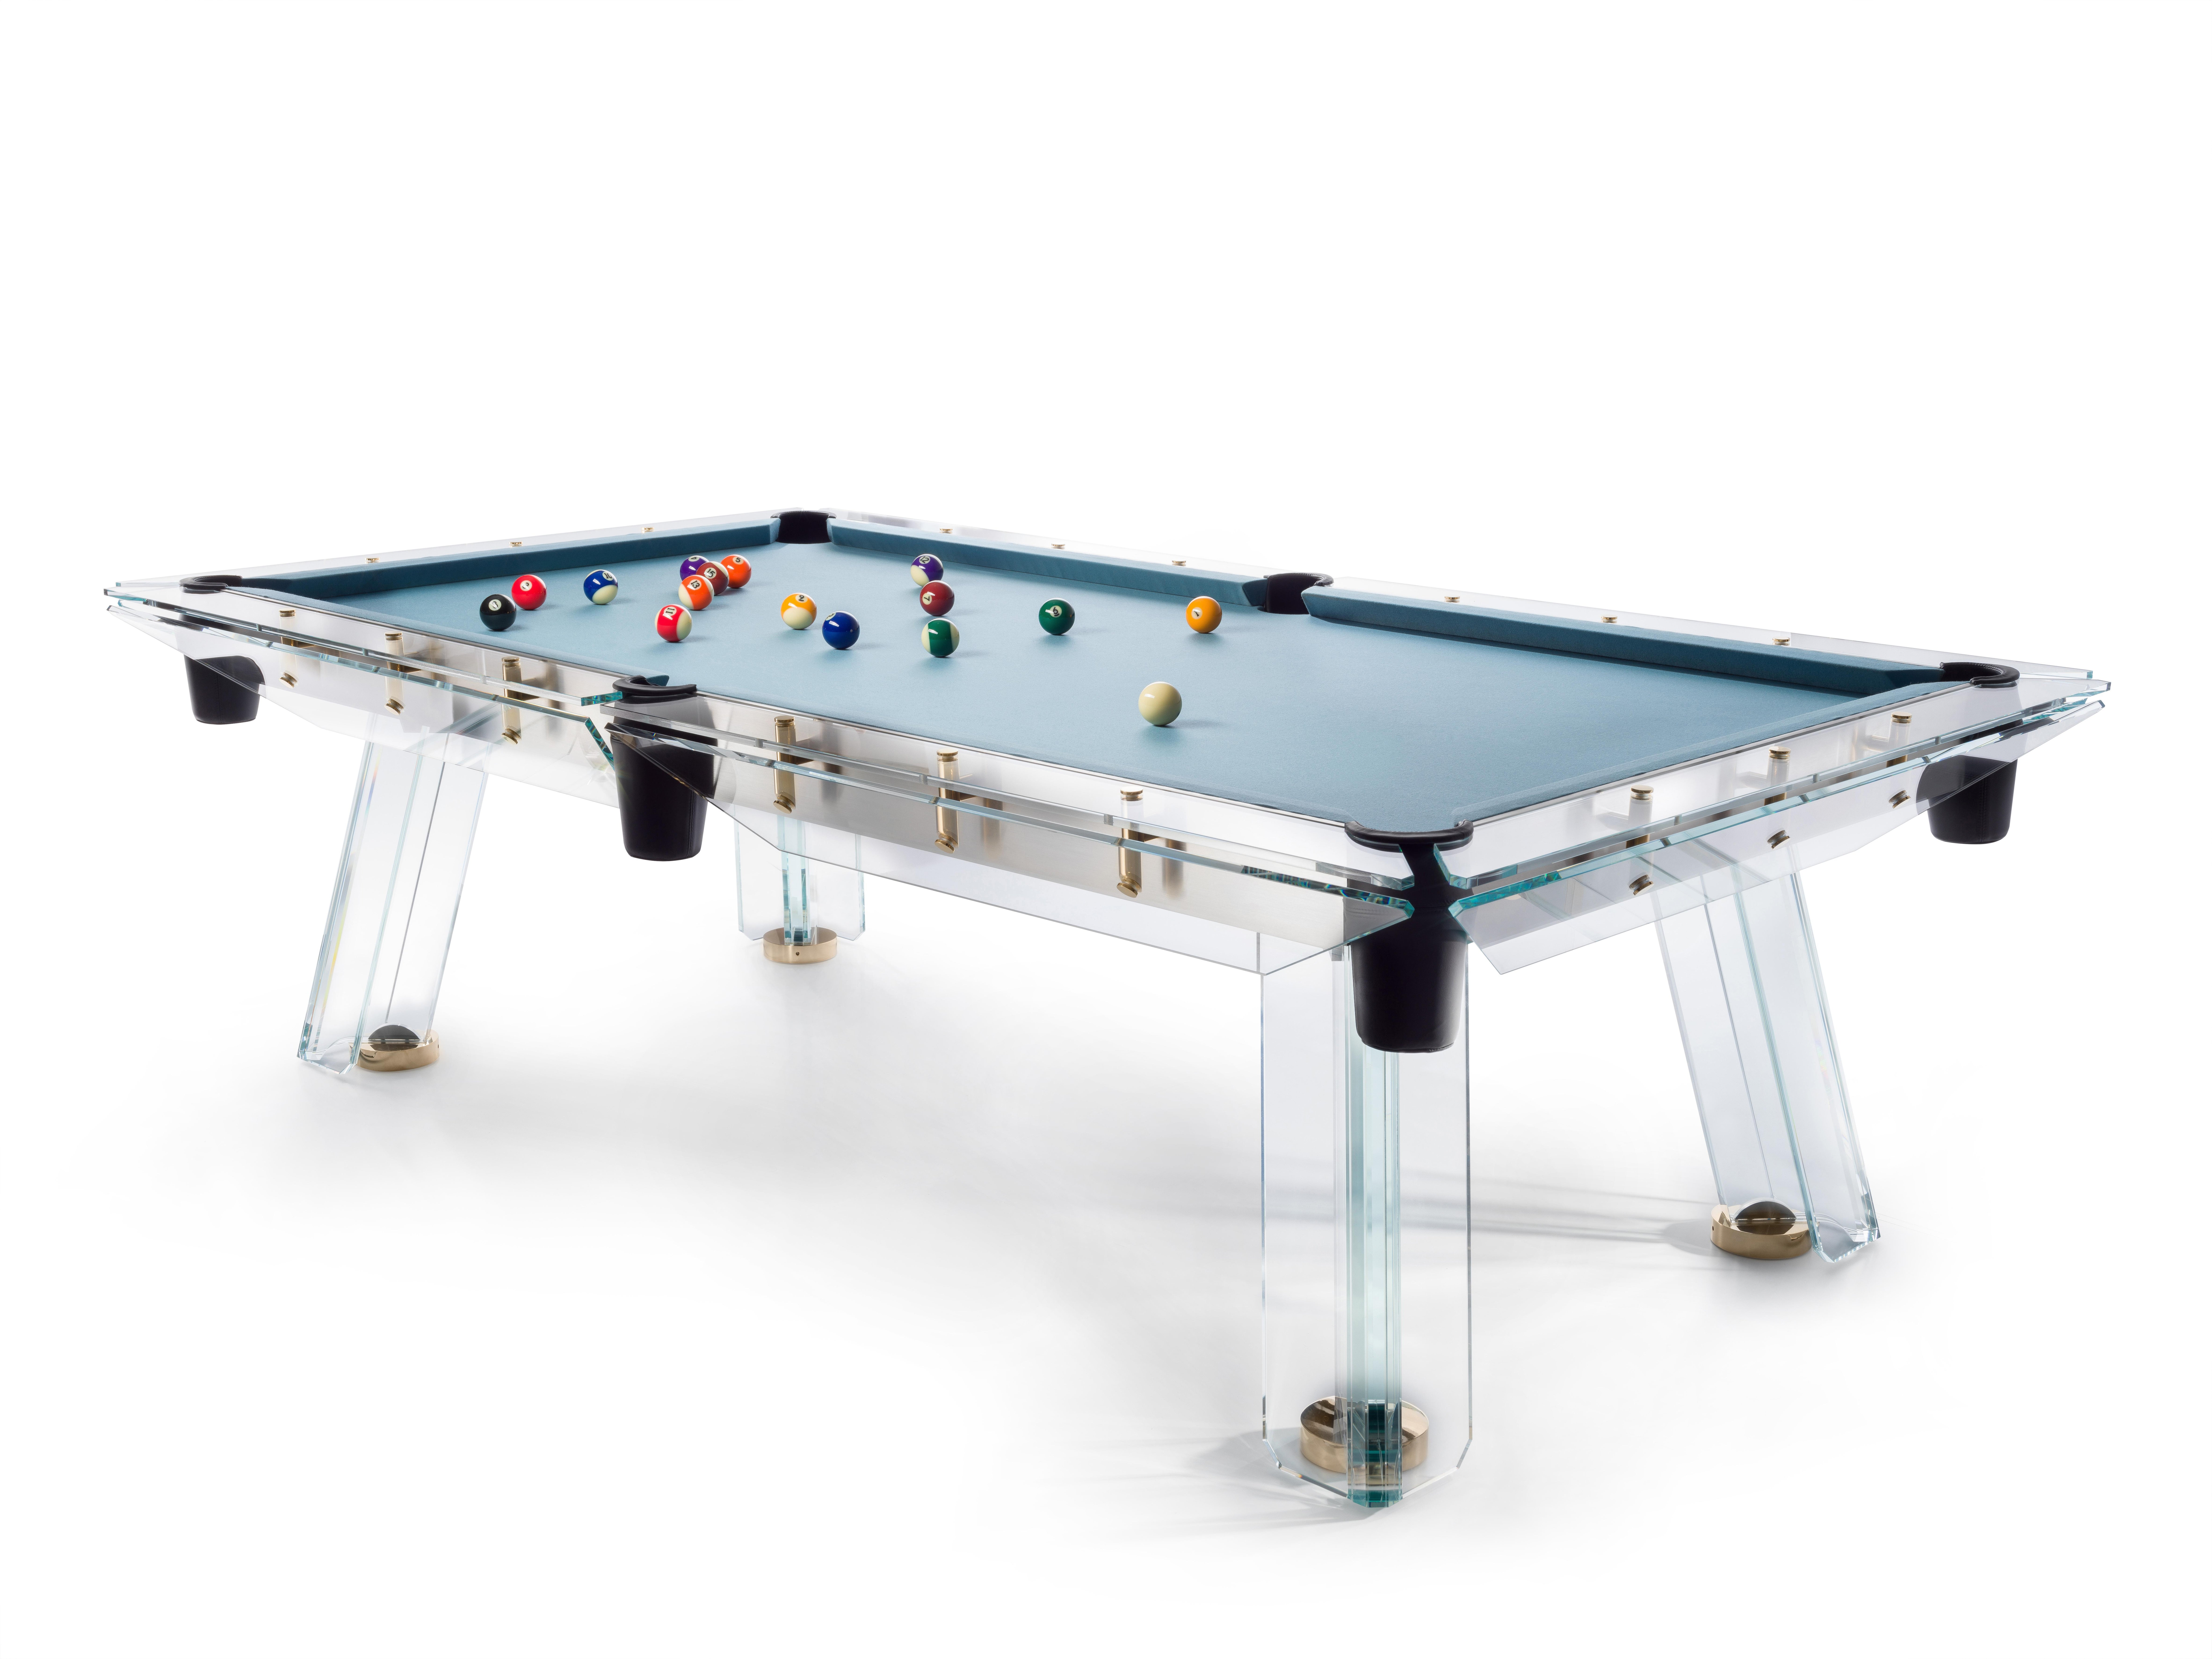 Filotto Gold Player Pool table by Impatia
Dimensions: D268 x W152 x H82 cm
Weight: 640 kg
Material: Frame and legs in low-iron glass, 24k gold plated components
Three-piece Italian slate base,Simonis cloth, Leather pockets.
Also Available: